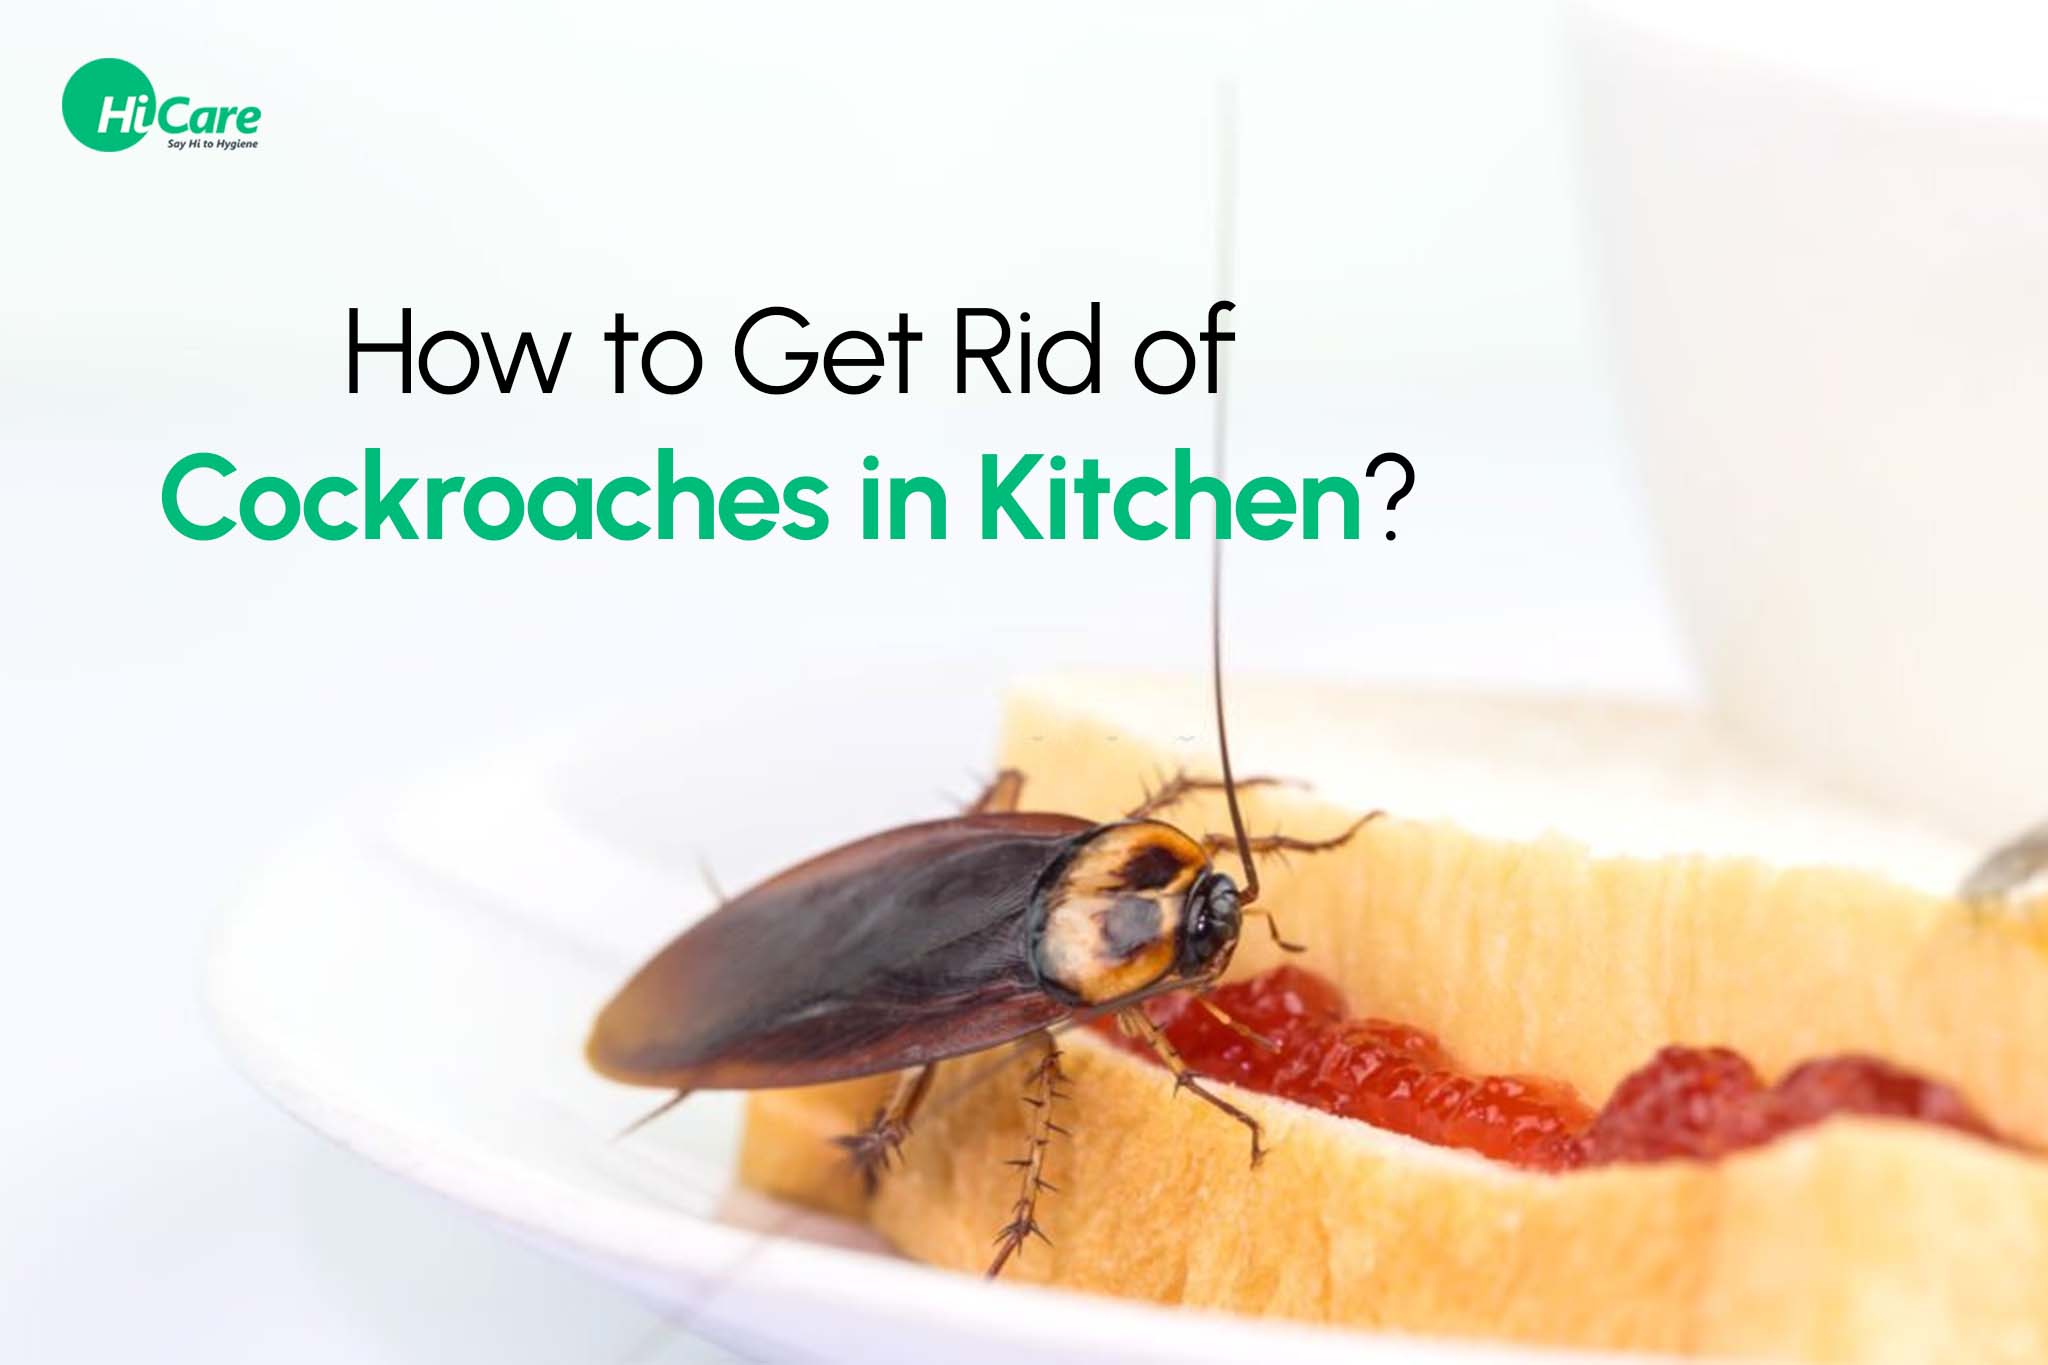 How to Get Rid of Cockroaches in the Kitchen?